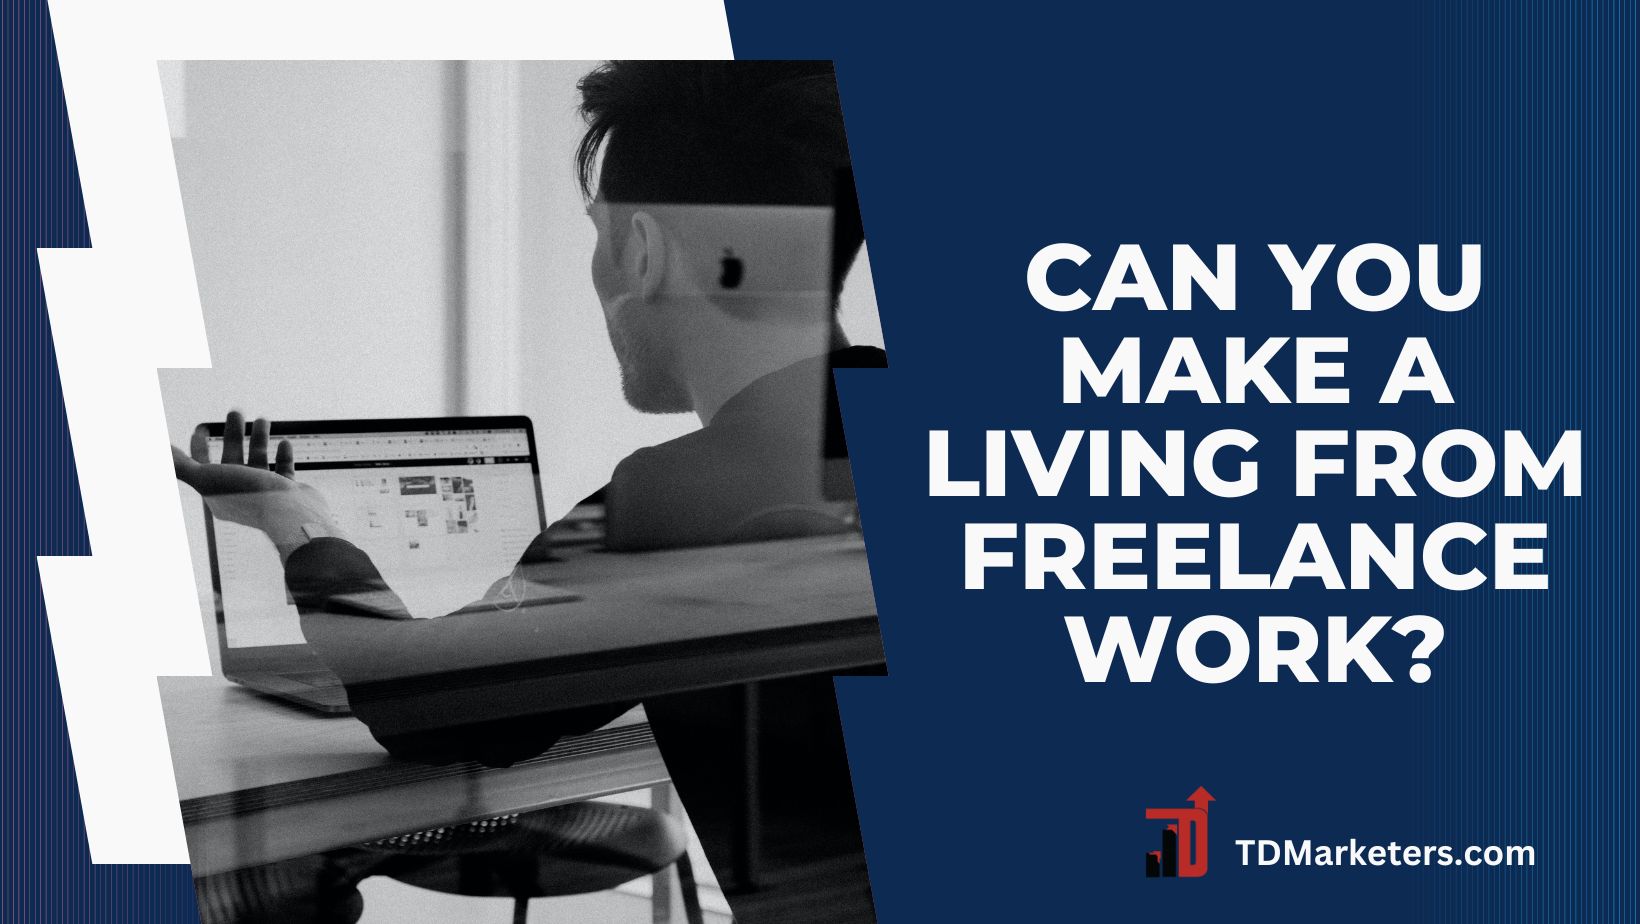 Can you make a living from freelance work?